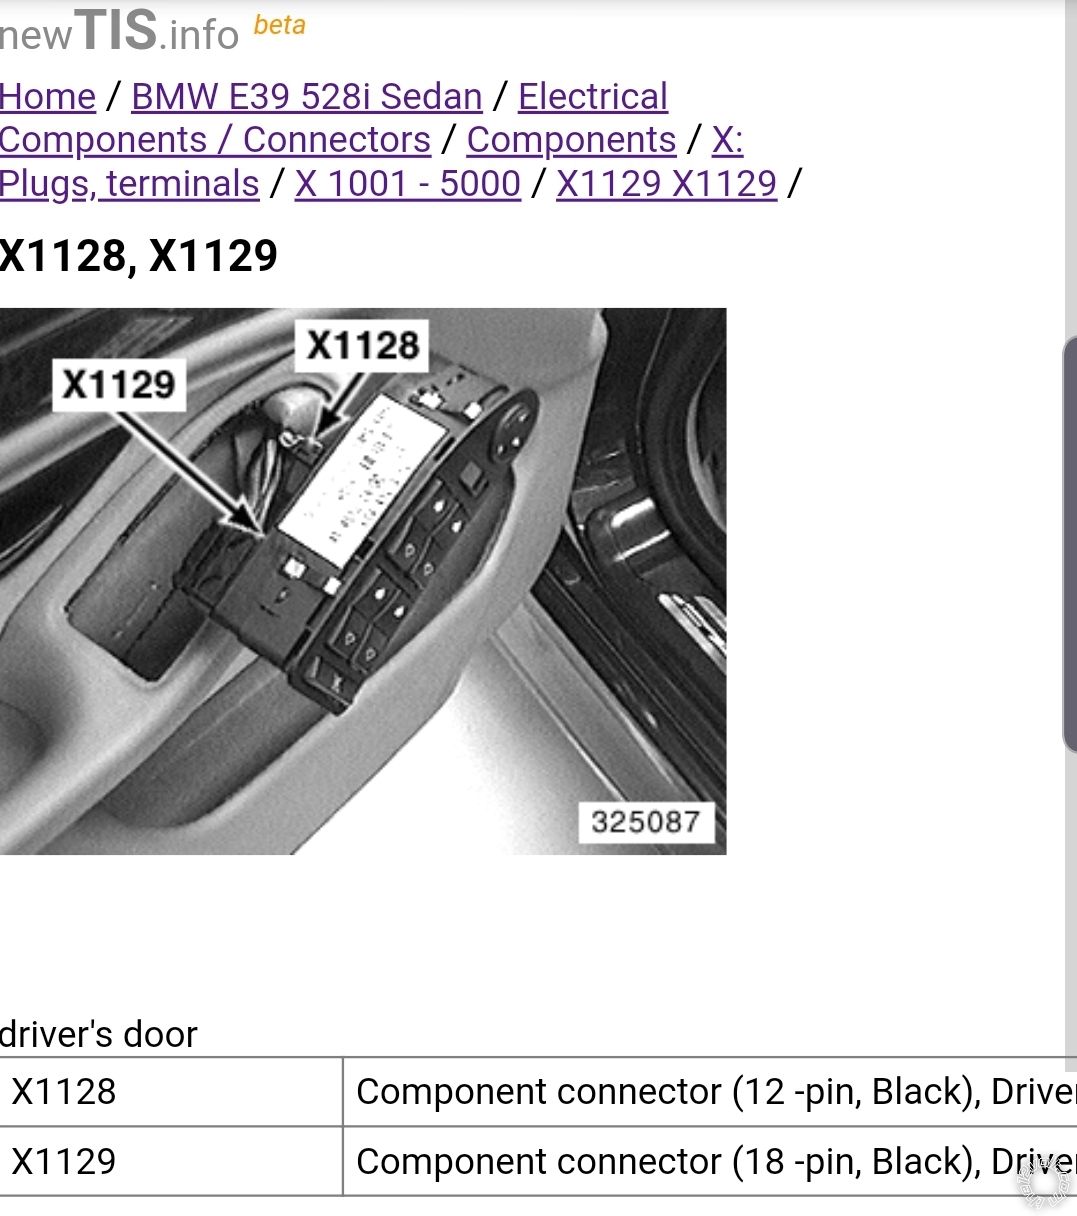 Pictorial Remote Starter 1998 BMW 528i E39 - Last Post -- posted image.